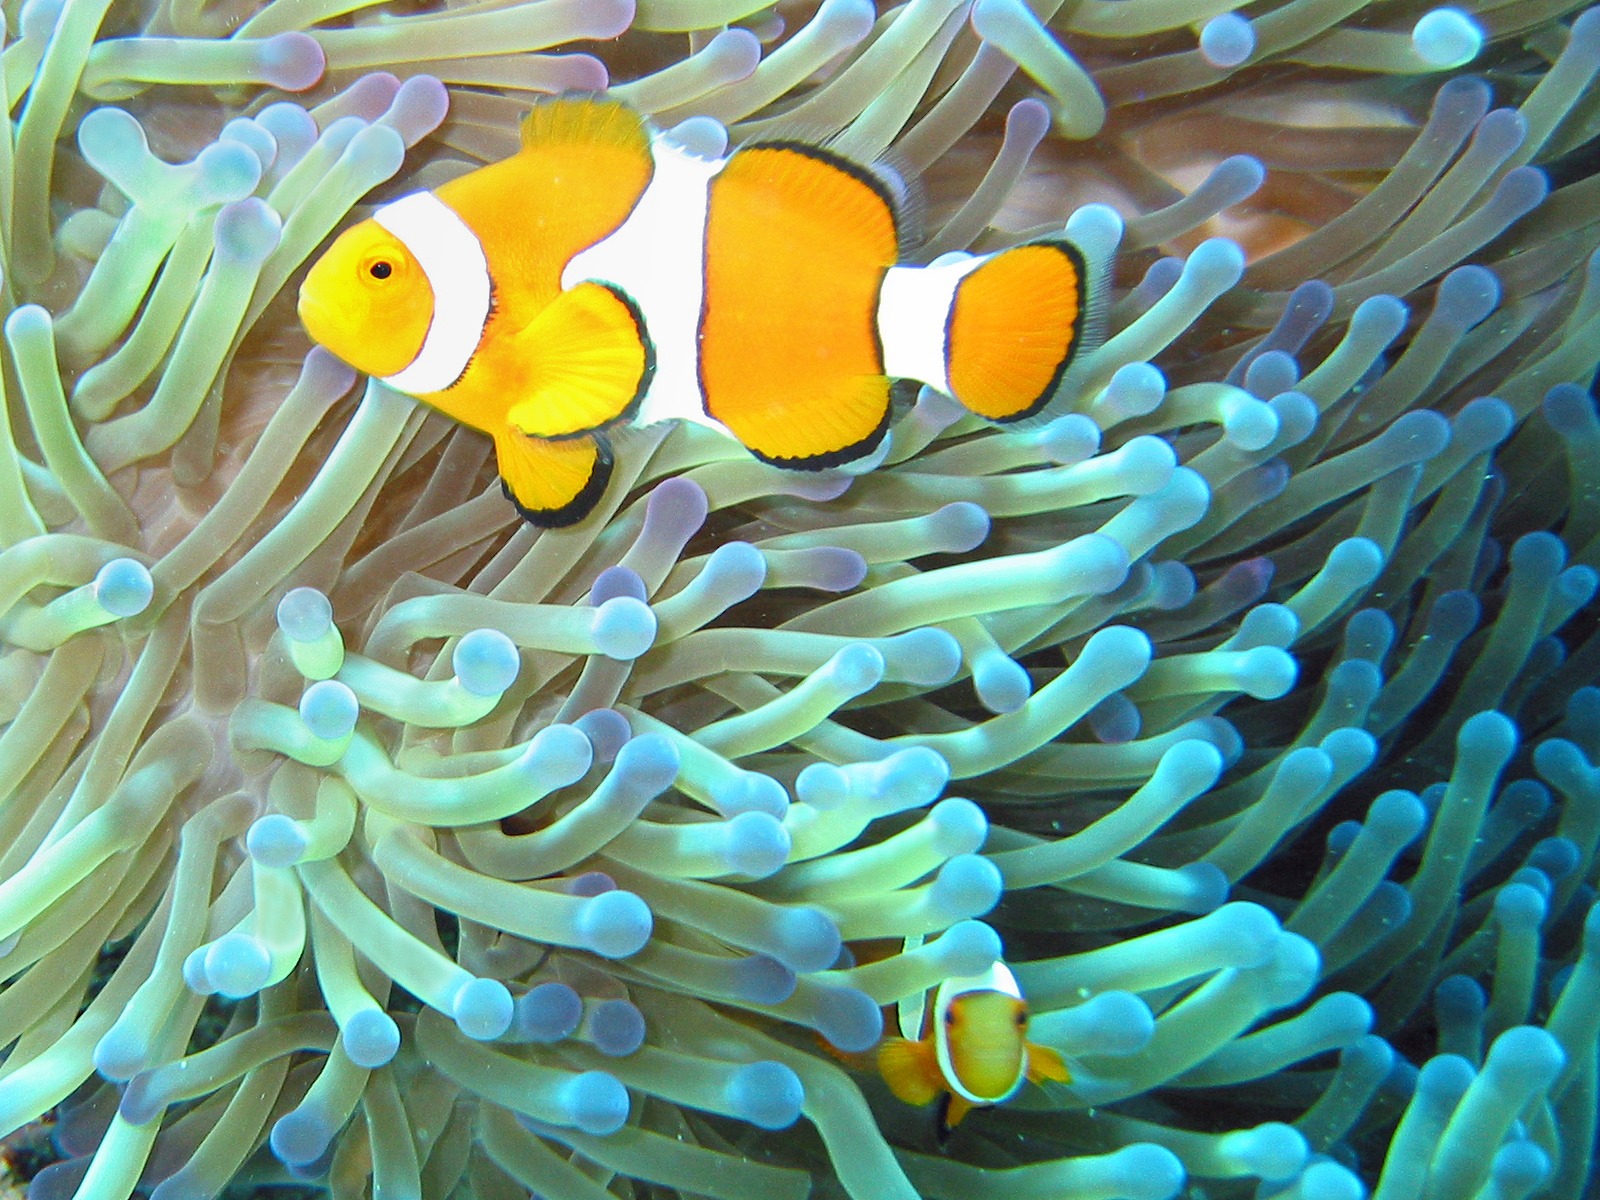 13 Awesome Clown Fish Pictures 1579541641